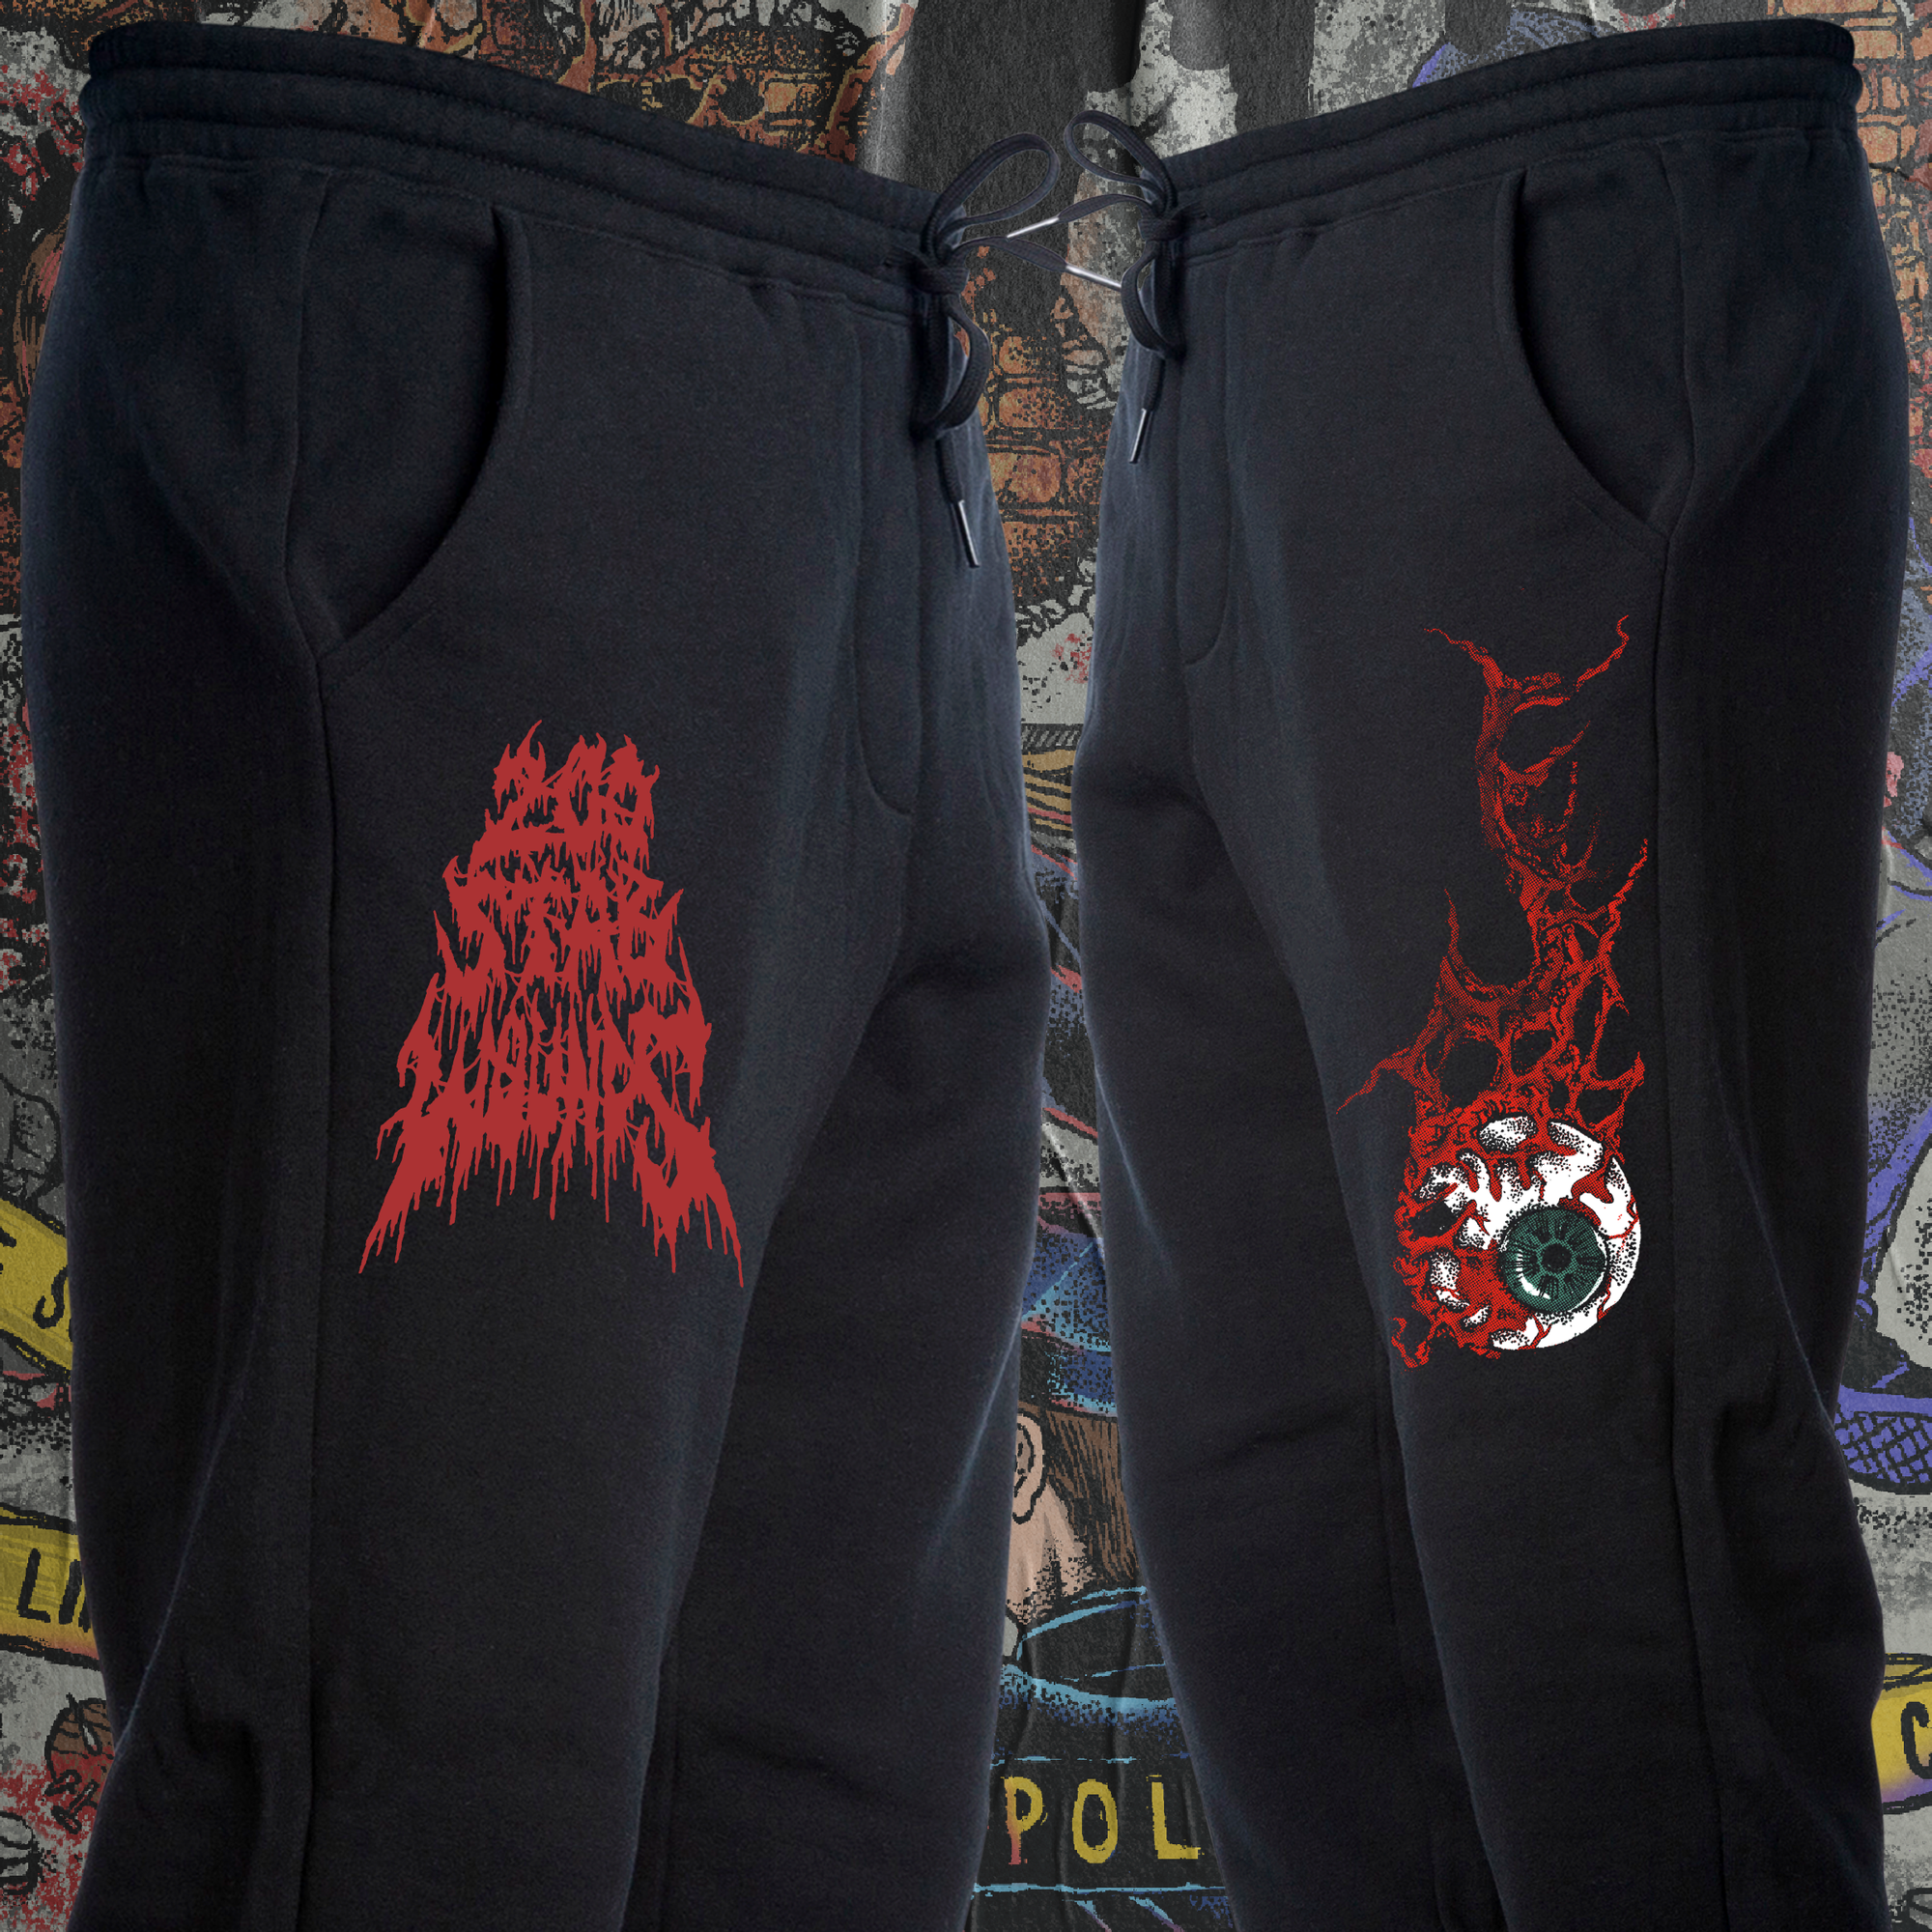 200 STAB WOUNDS SWEATPANTS